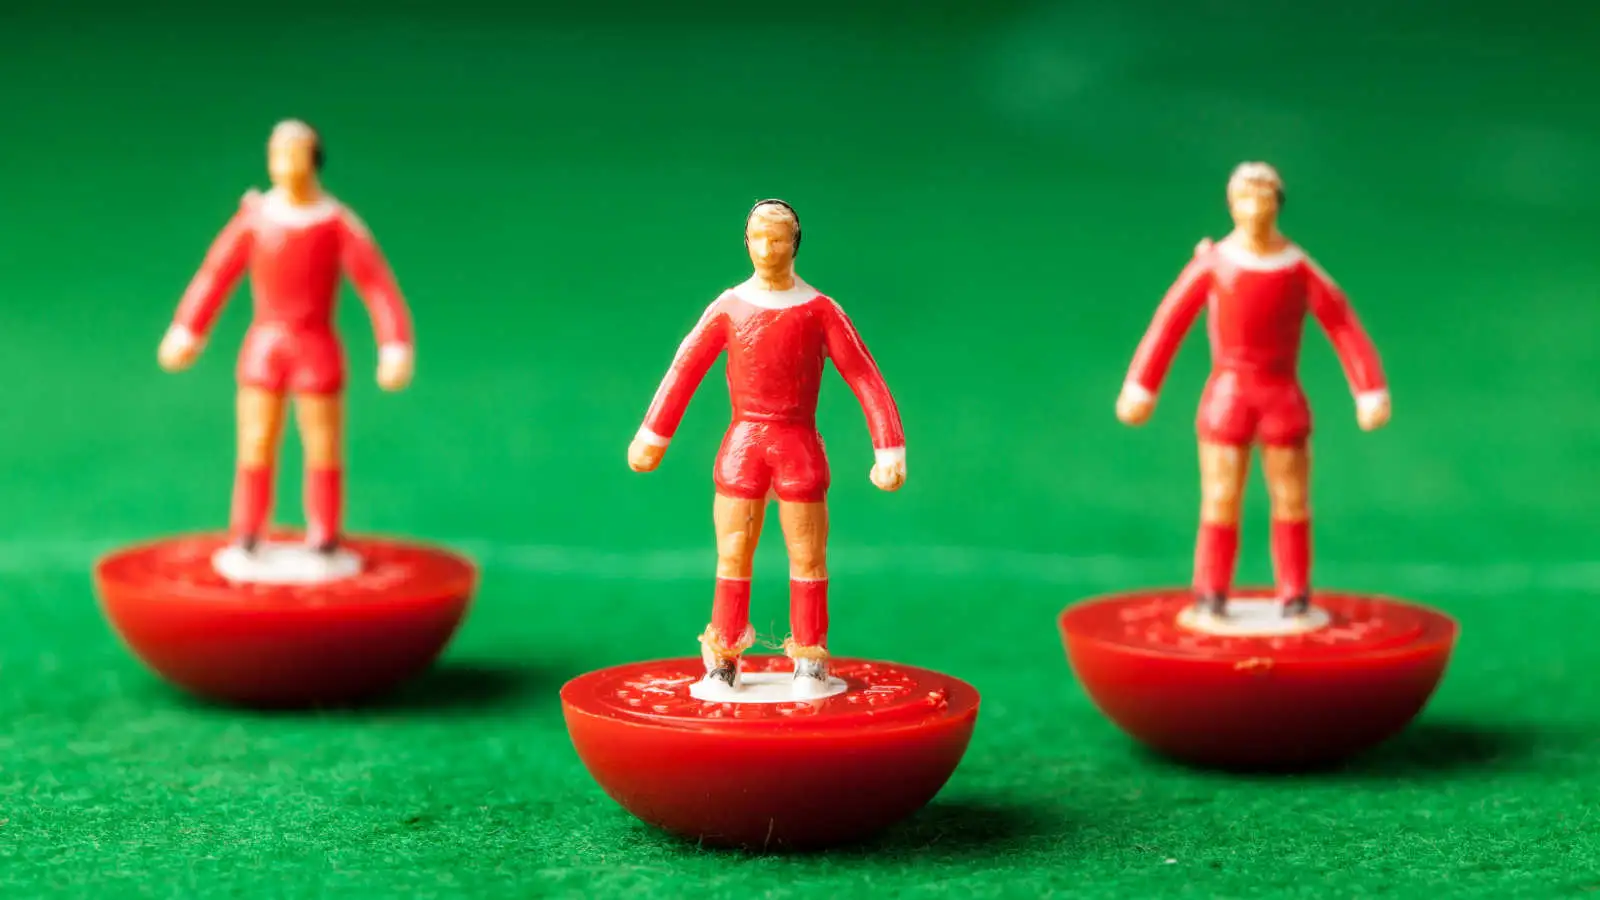 Subbuteo players lined up on a pitch